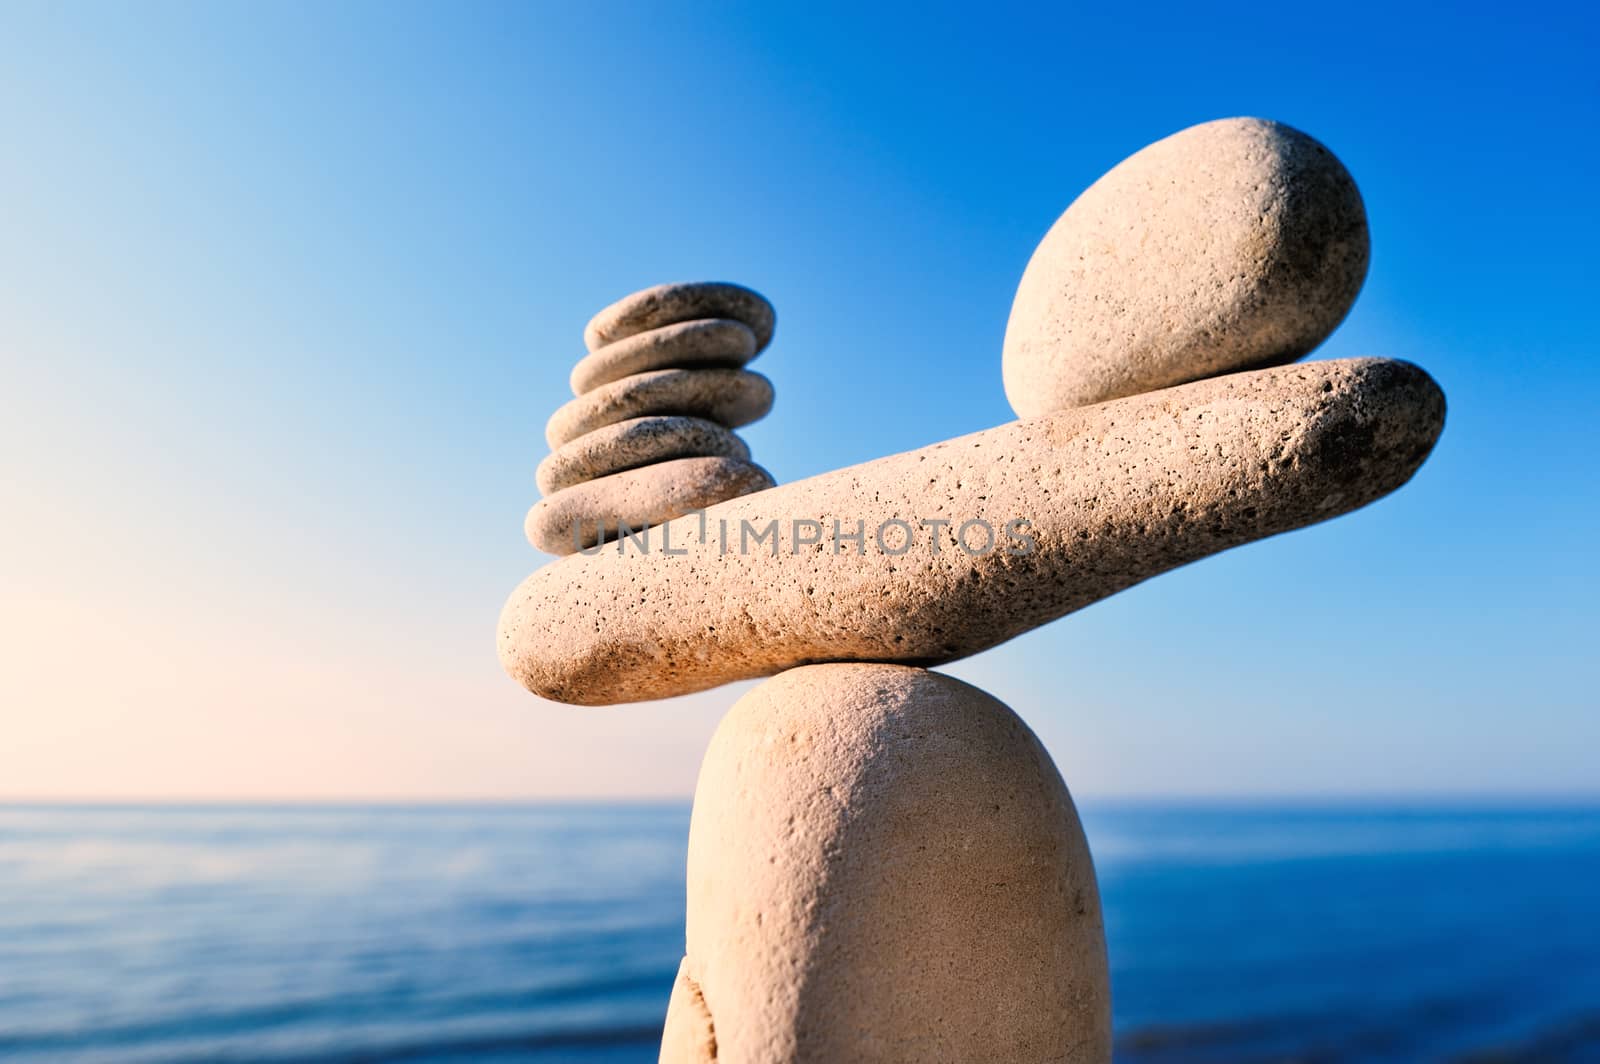 Balancing of white pebbles on the top of stone